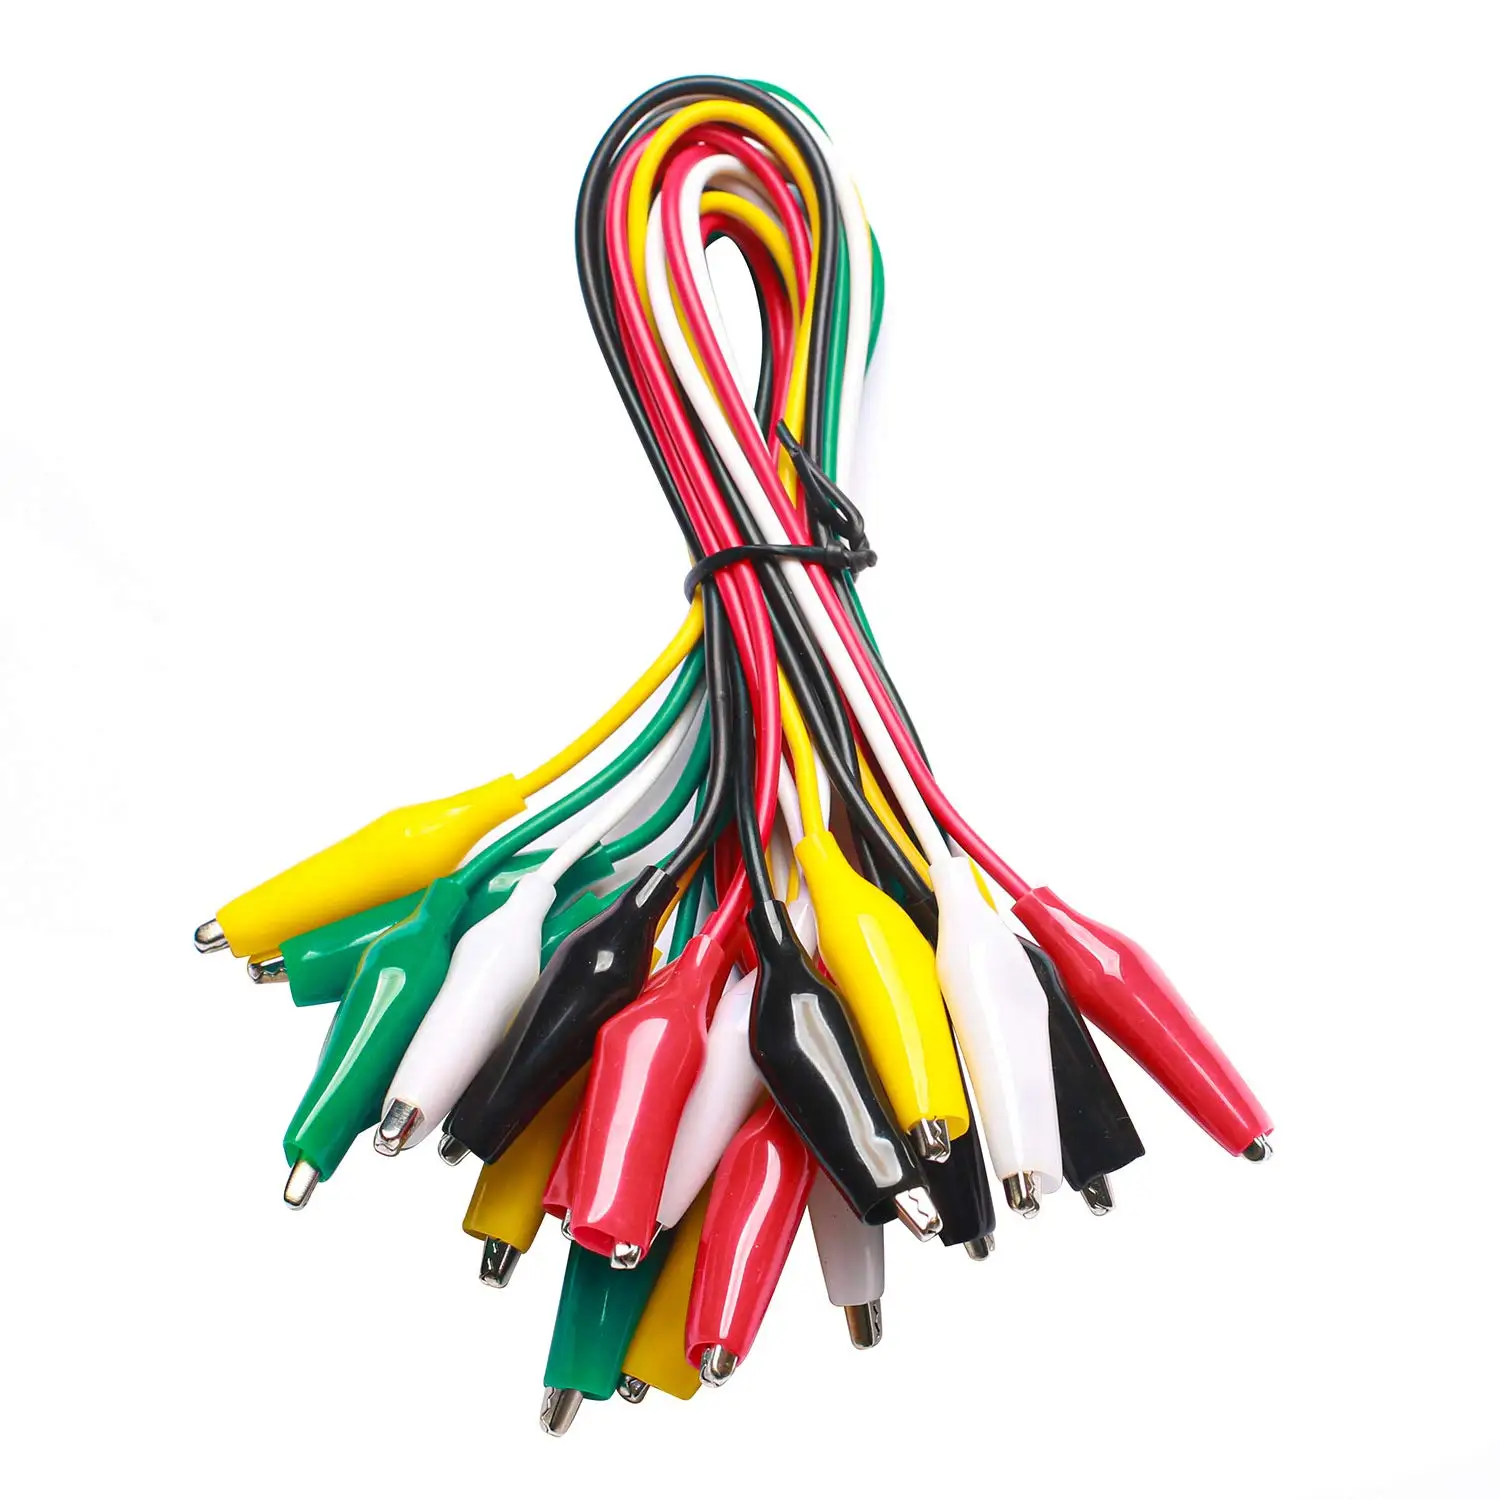 Popular in Amazon FIve Different Colors Test Leads Alligator Clips with Different Lengths and Sizes